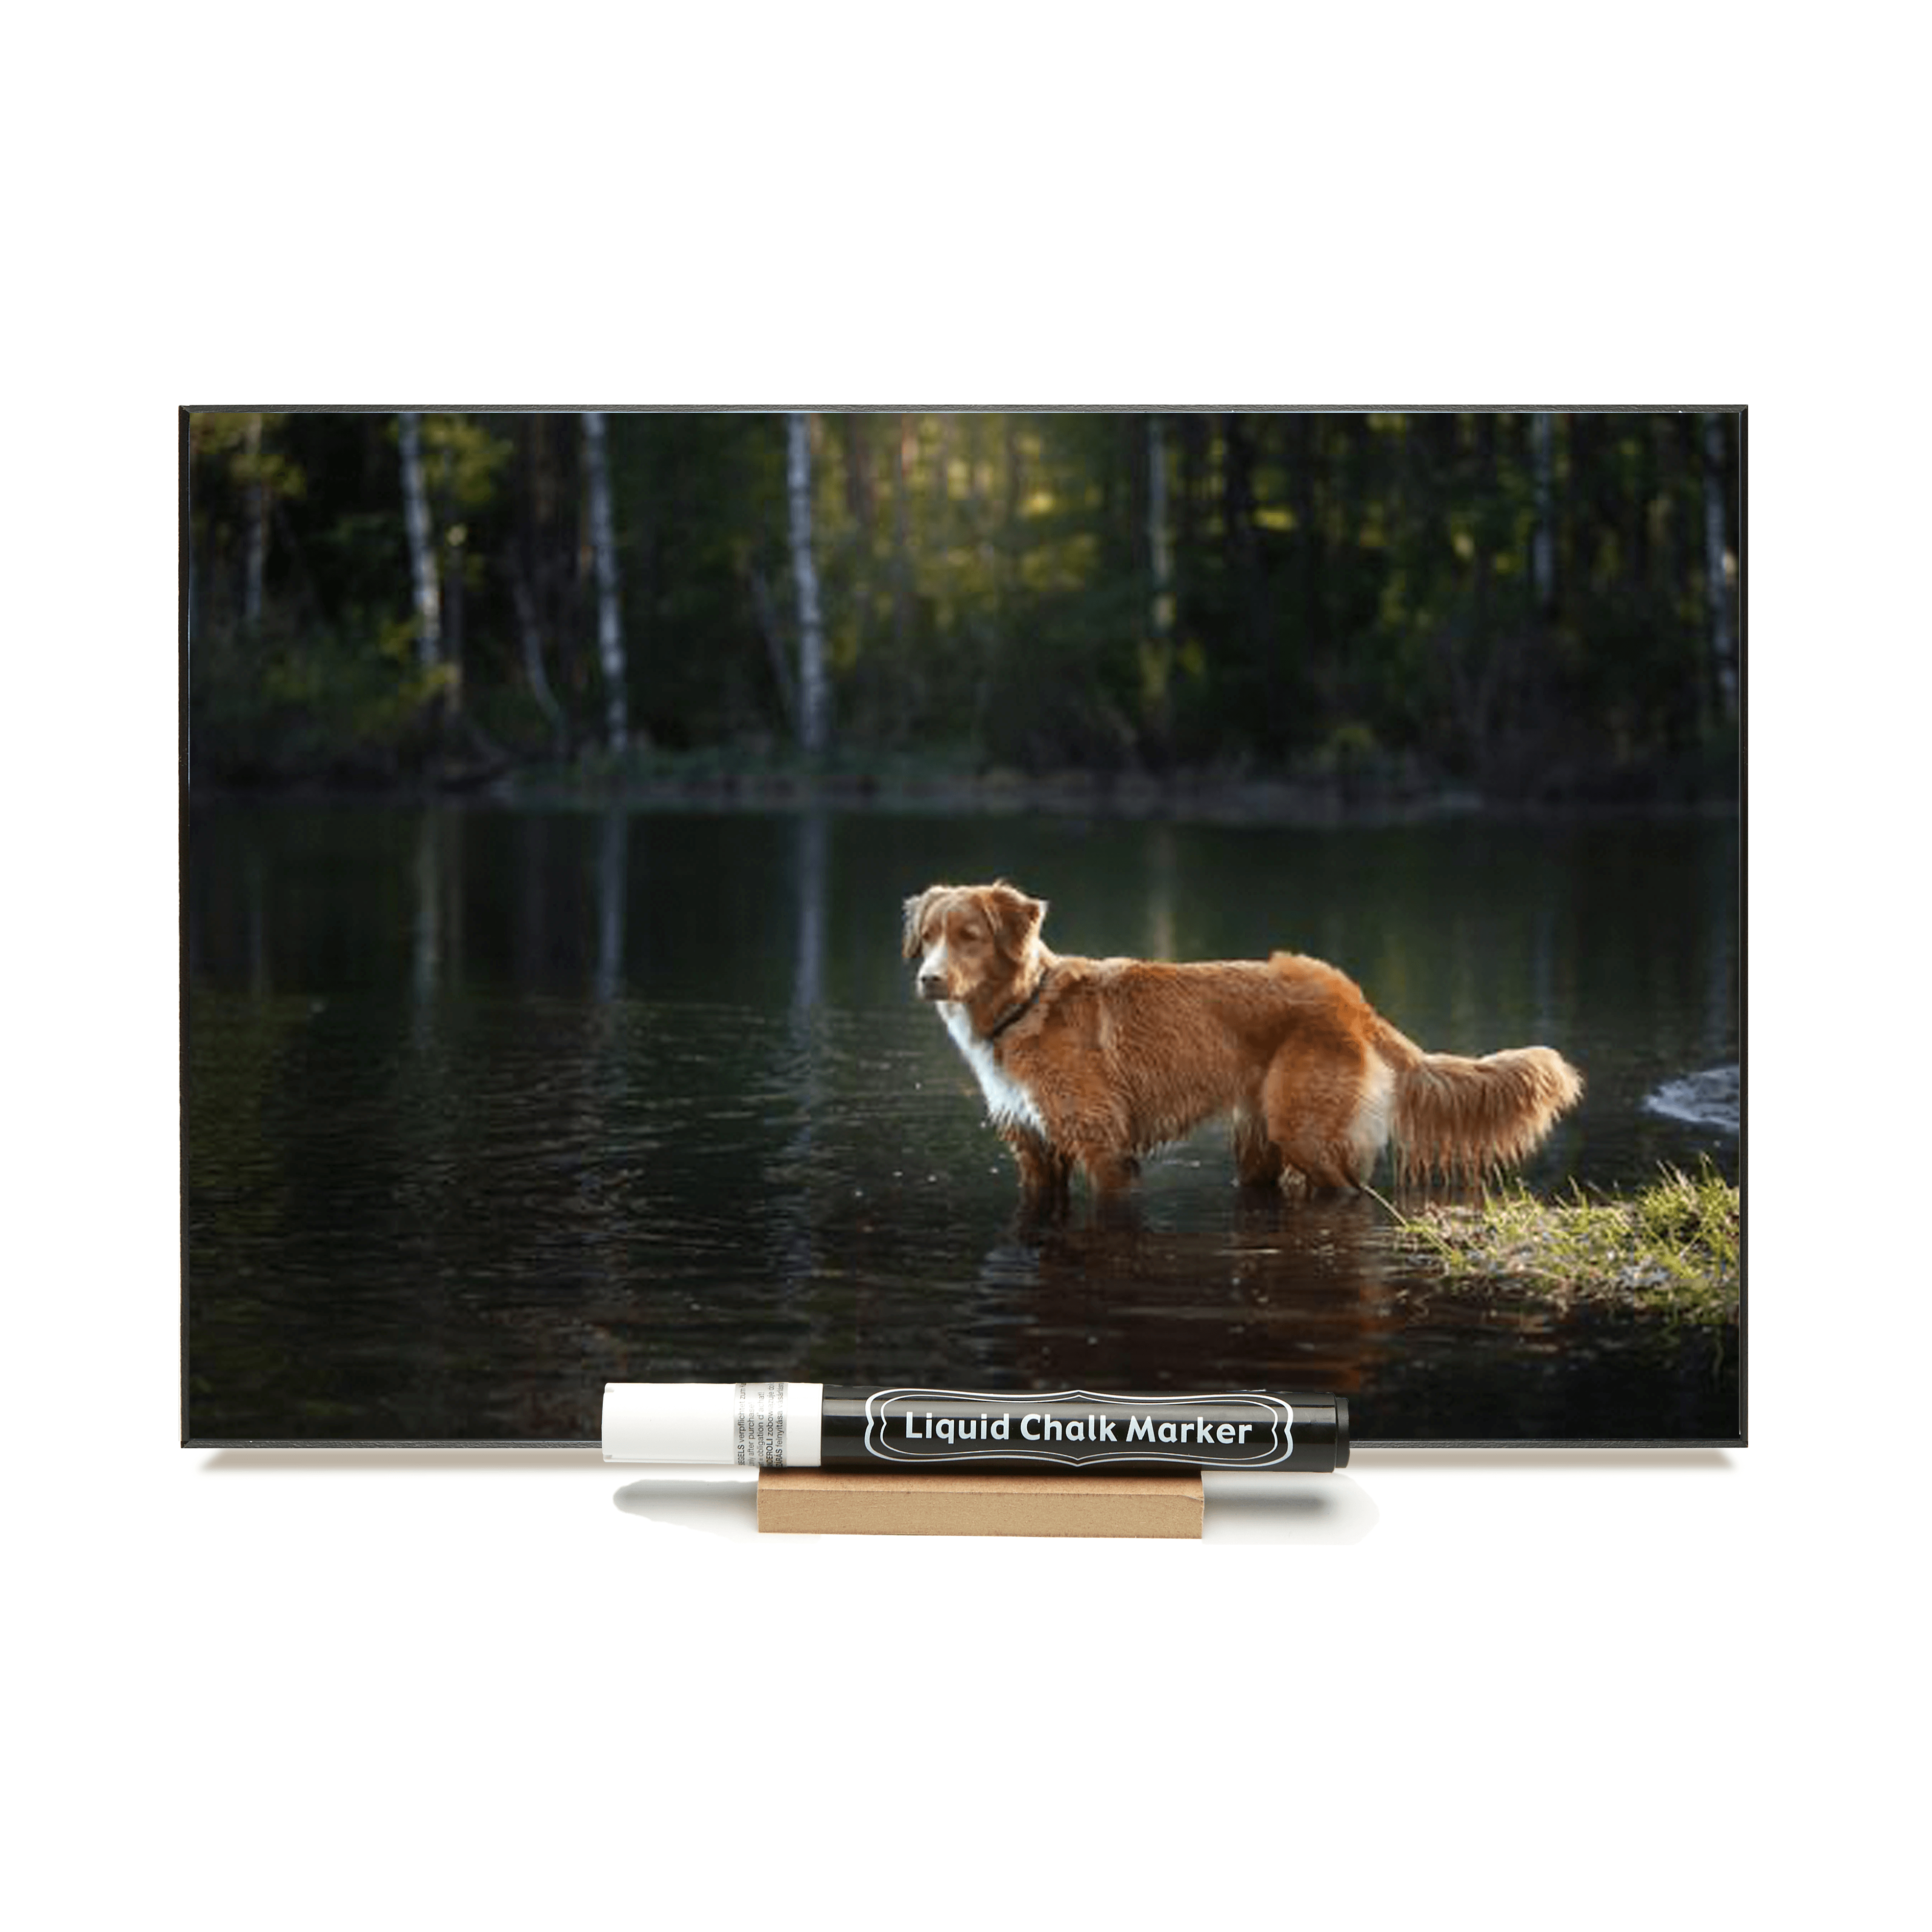 "Nova Scotia Duck Tolling Retriever In Water"  PHOTO CHALKBOARD  Includes Chalkboard, Chalk Marker and Stand